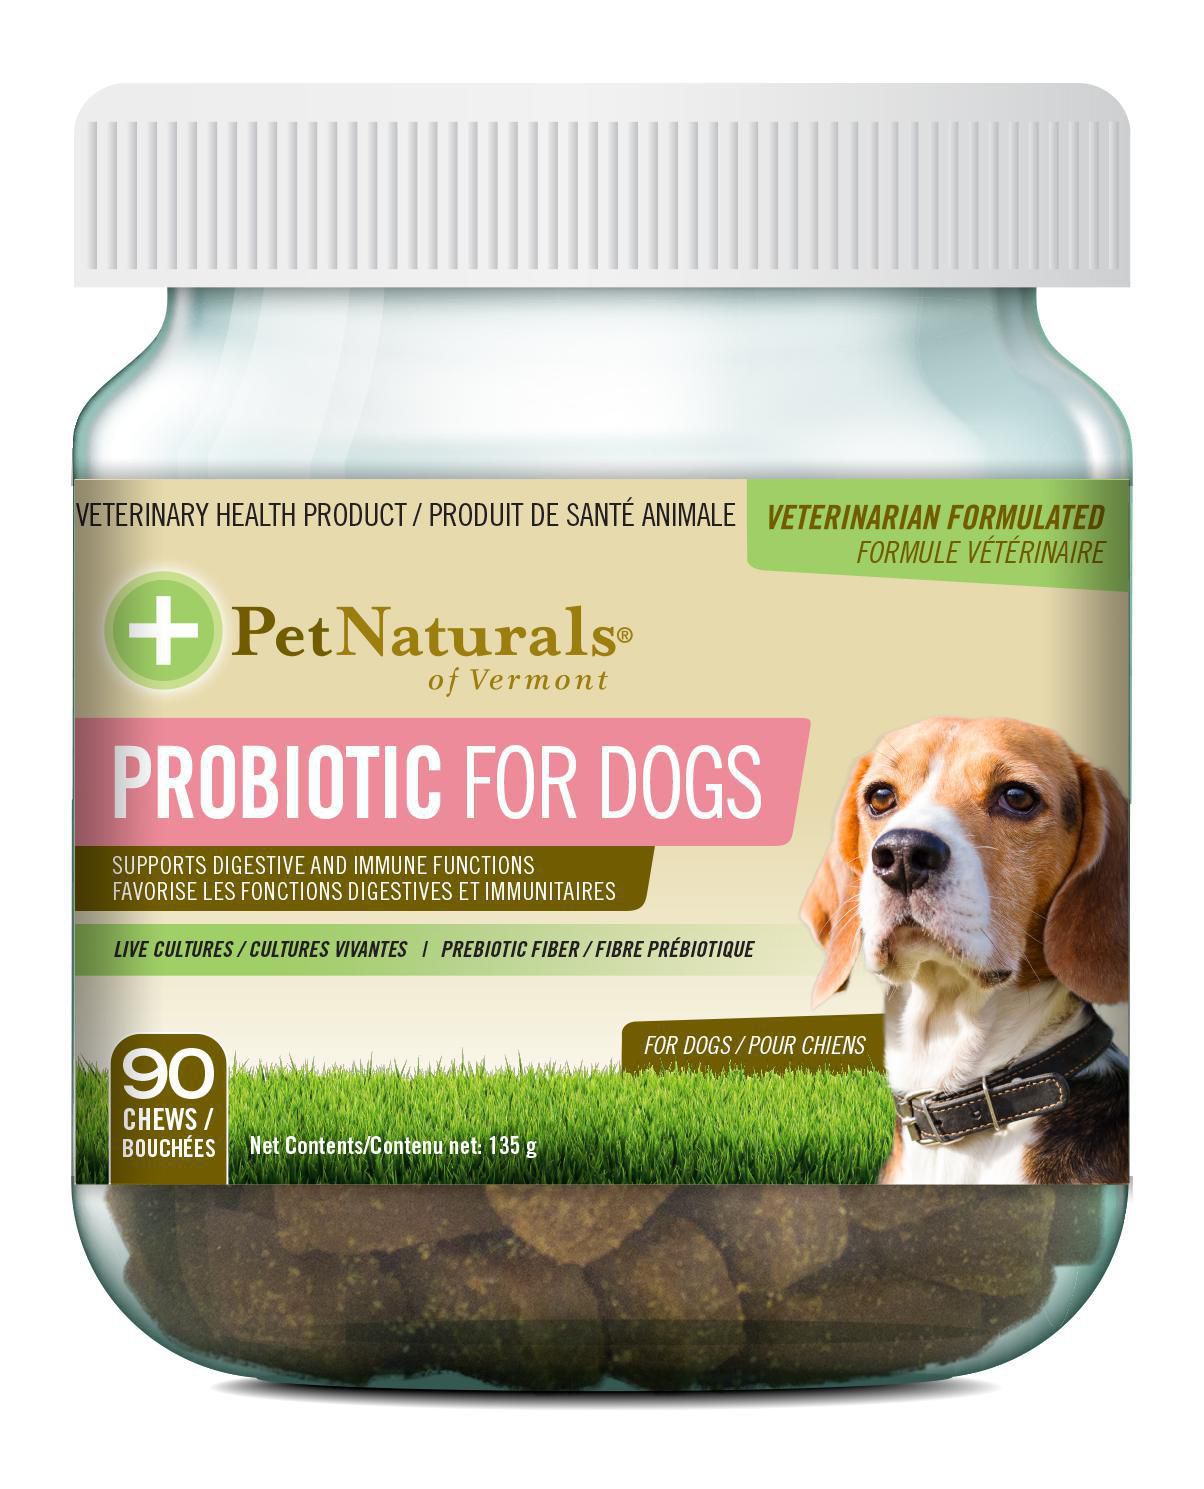 PET NATURALS OF VERMONT PROBIOTIC FOR DOGS Walmart Canada